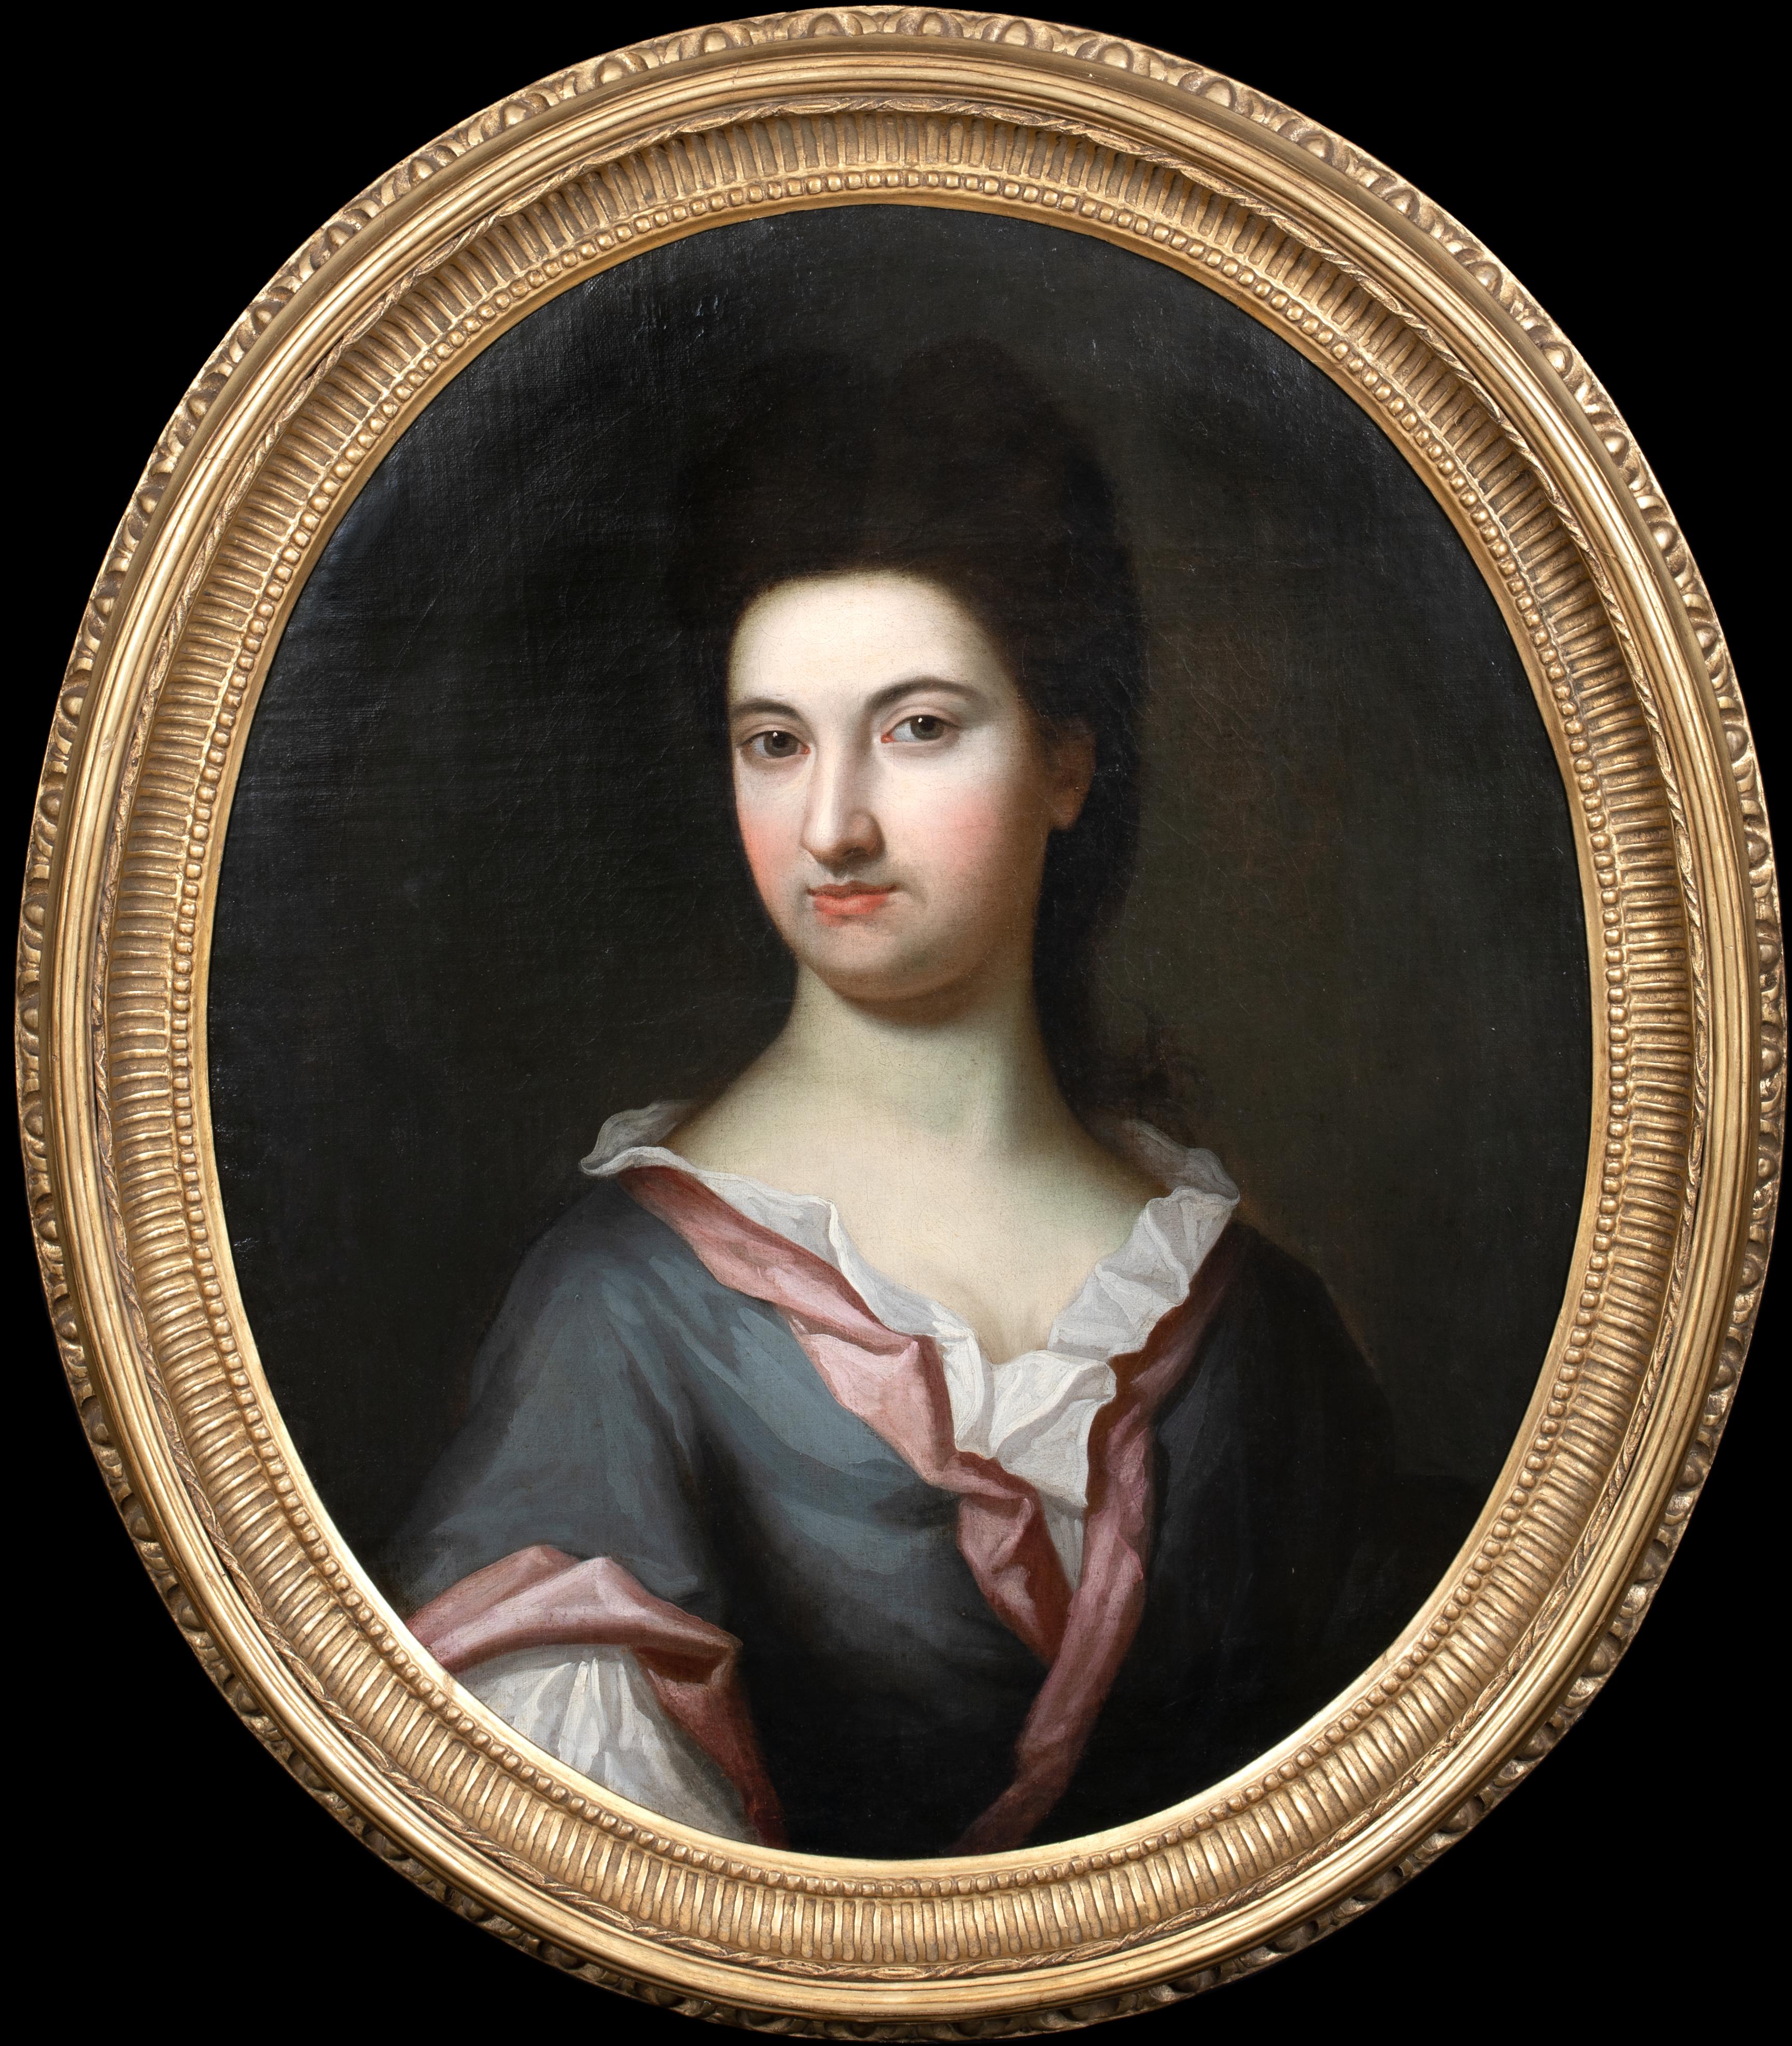 Sir Godfrey Kneller Portrait Painting - Lady Selby Of Melton. circa 1710  attributed to SIR GODFREY KNELLER (1646-1723)